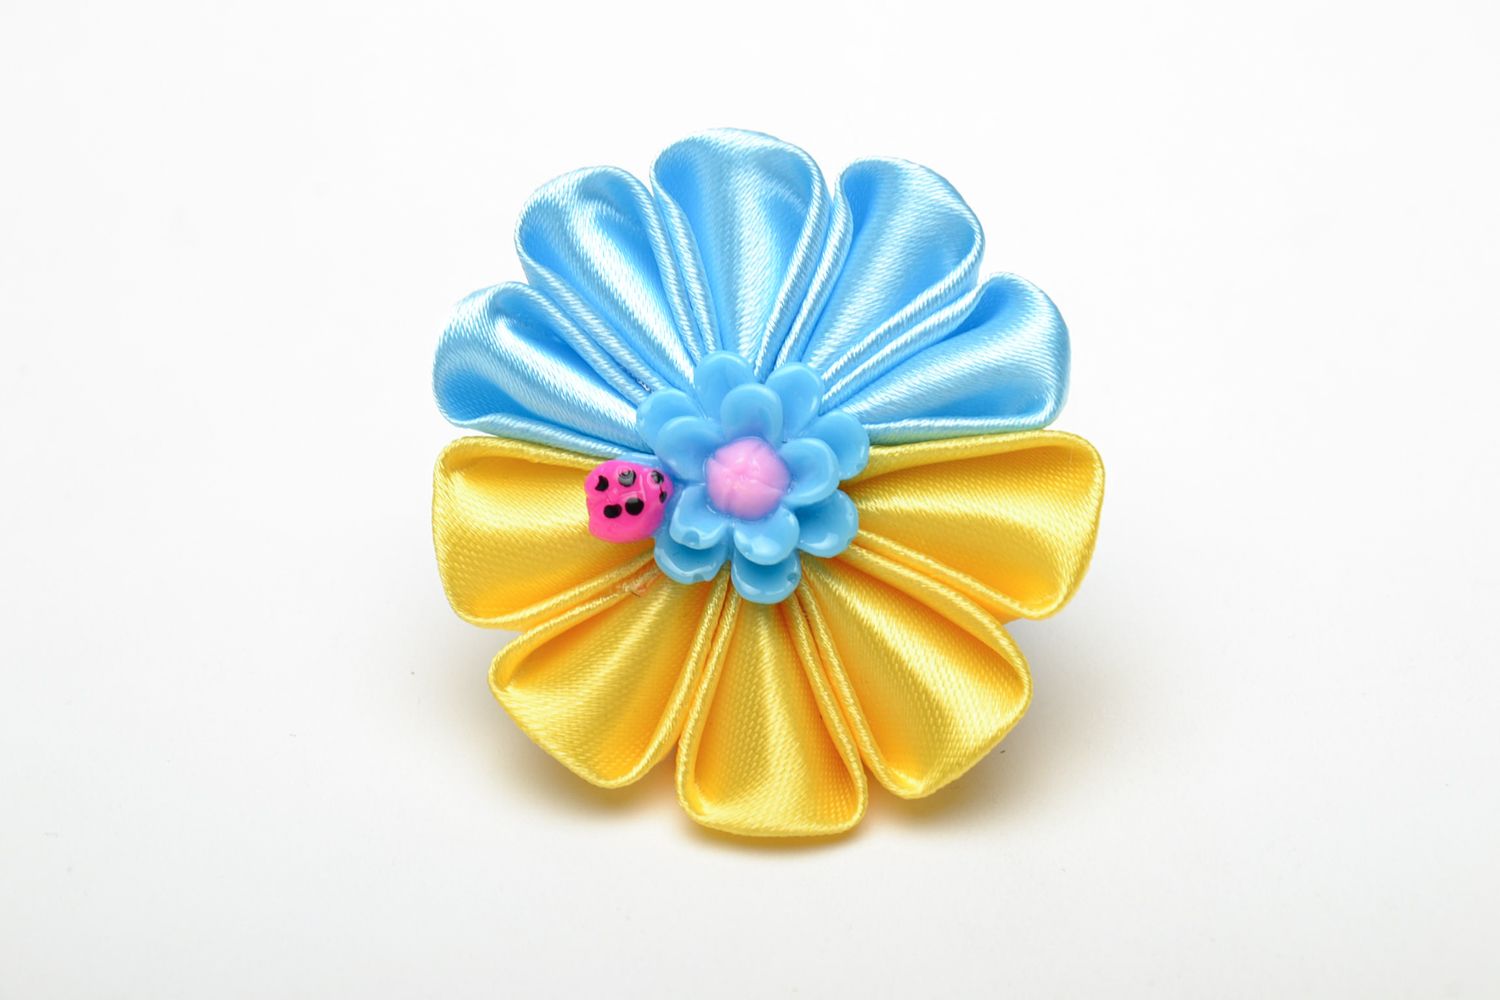 Yellow and blue kanzashi flower hair tie photo 2